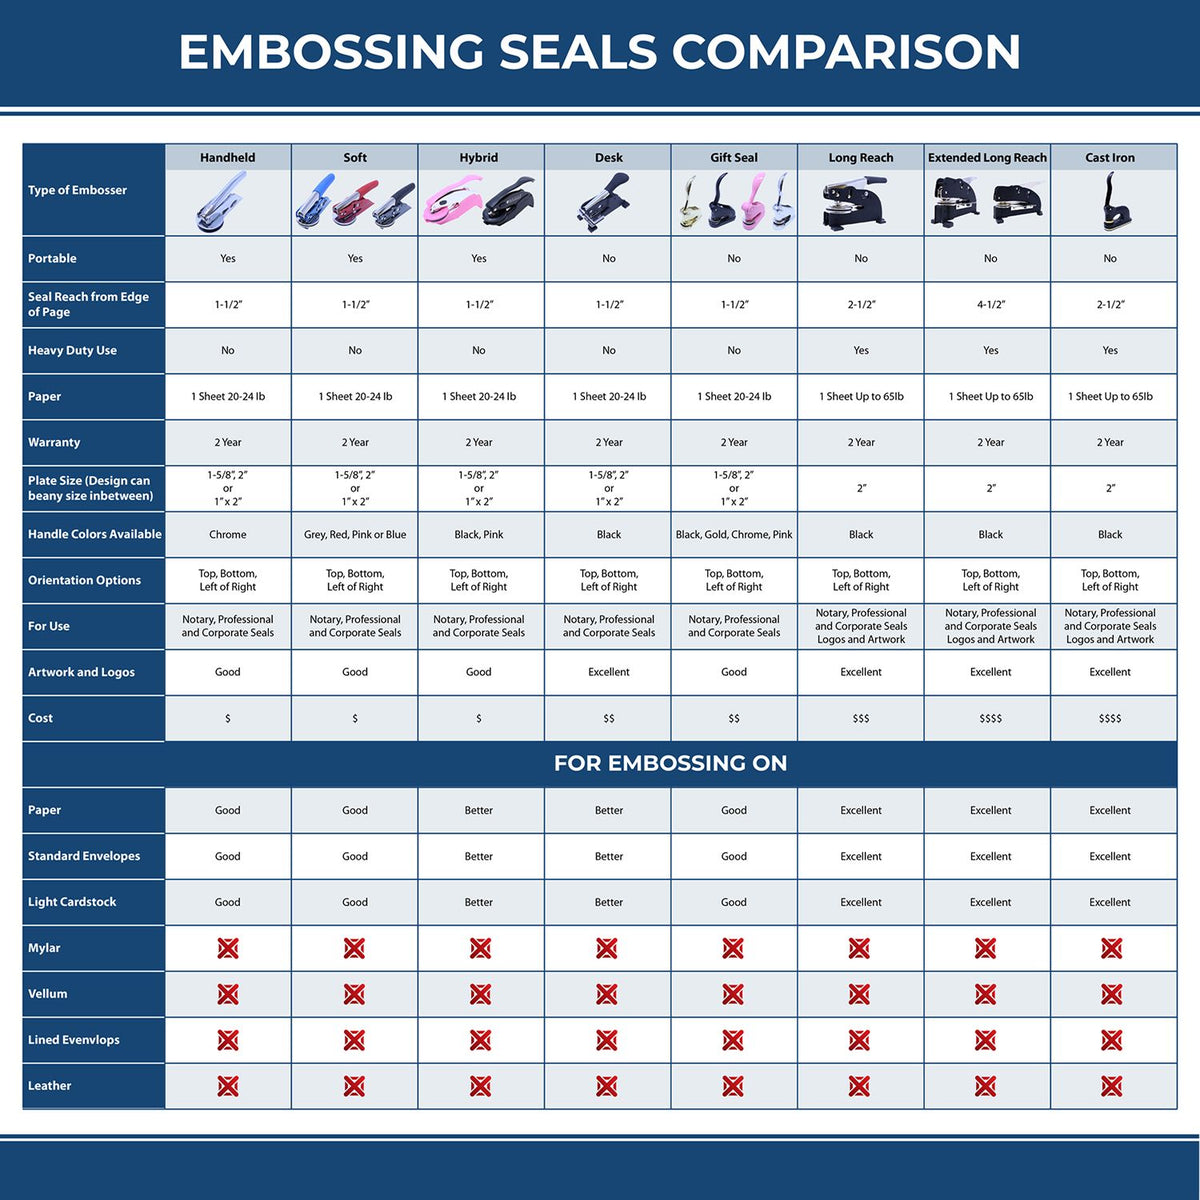 A comparison chart for the different types of mount models available for the Soft Pocket Maine Landscape Architect Embosser.